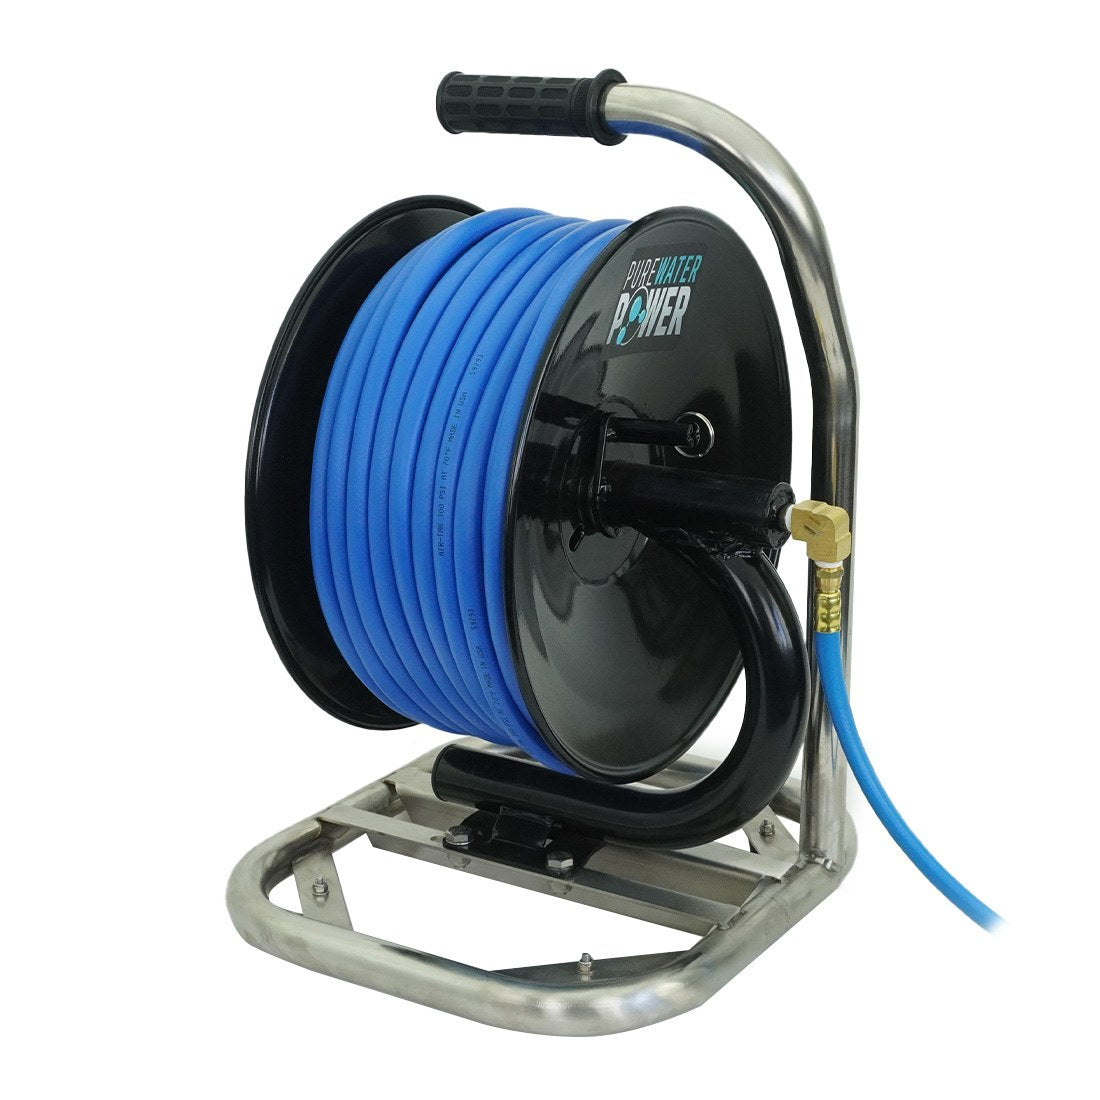 PWP Heavy Duty Portable Hose Reel - 150 Foot Right Angle View